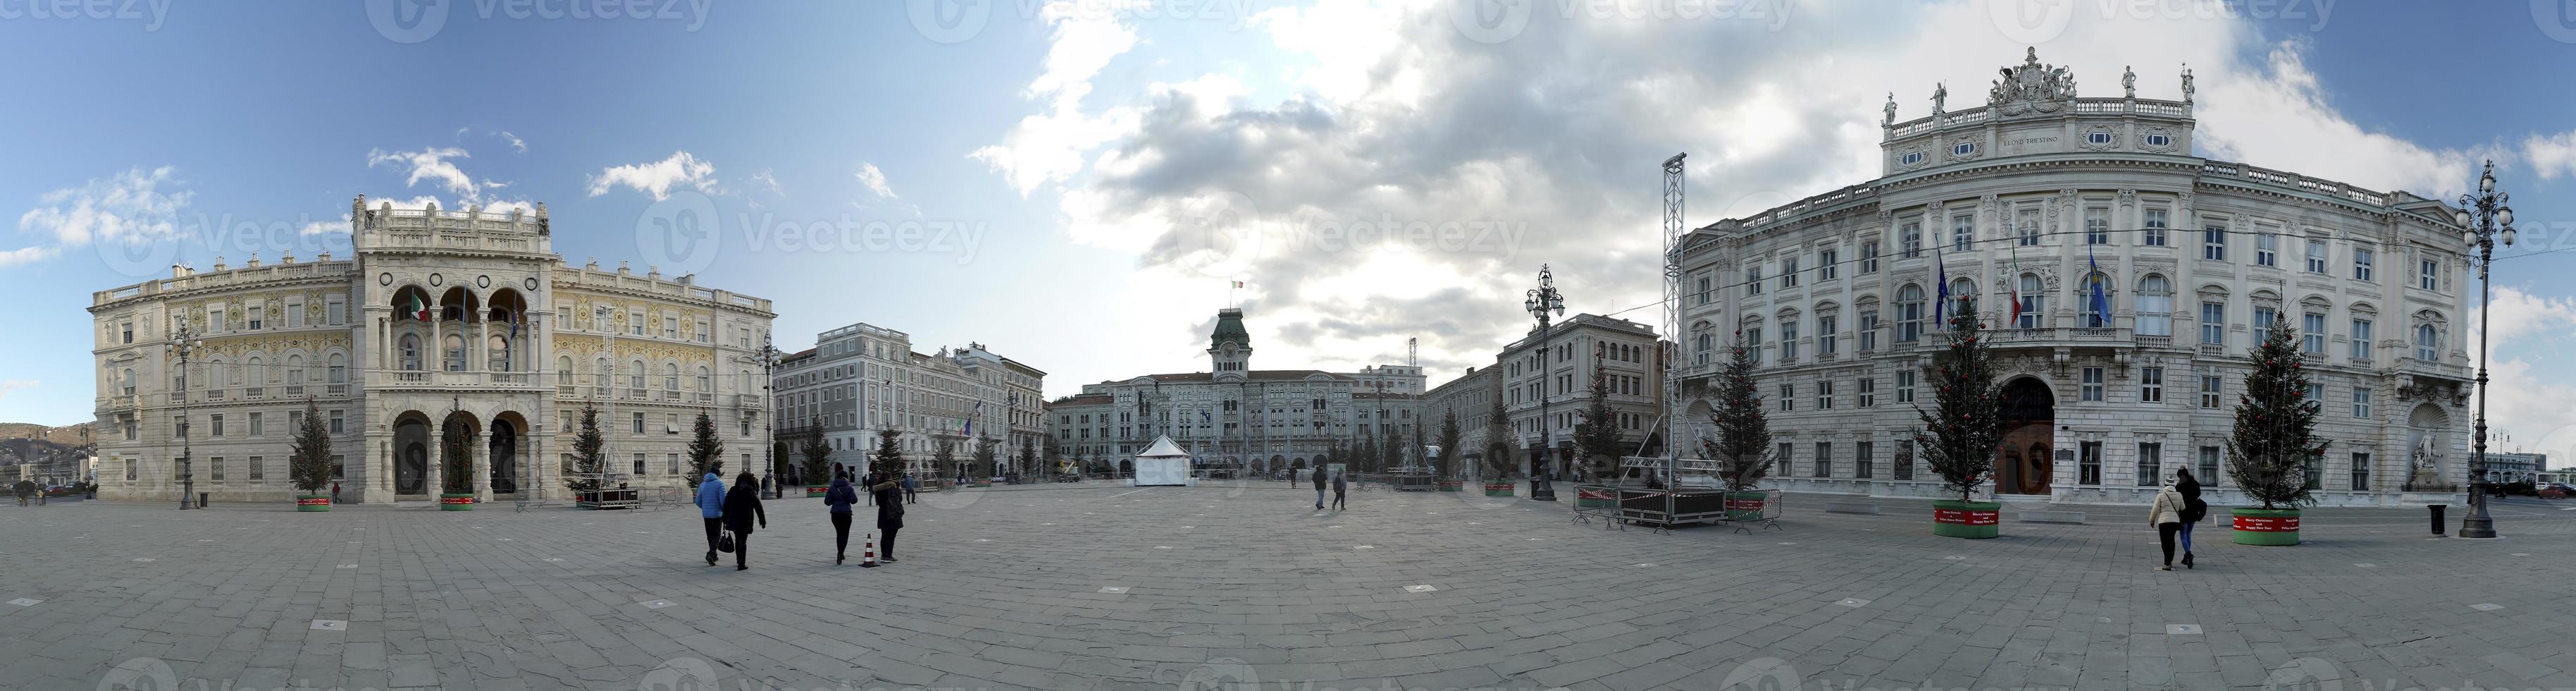 Triest main place 360 degreees view photo